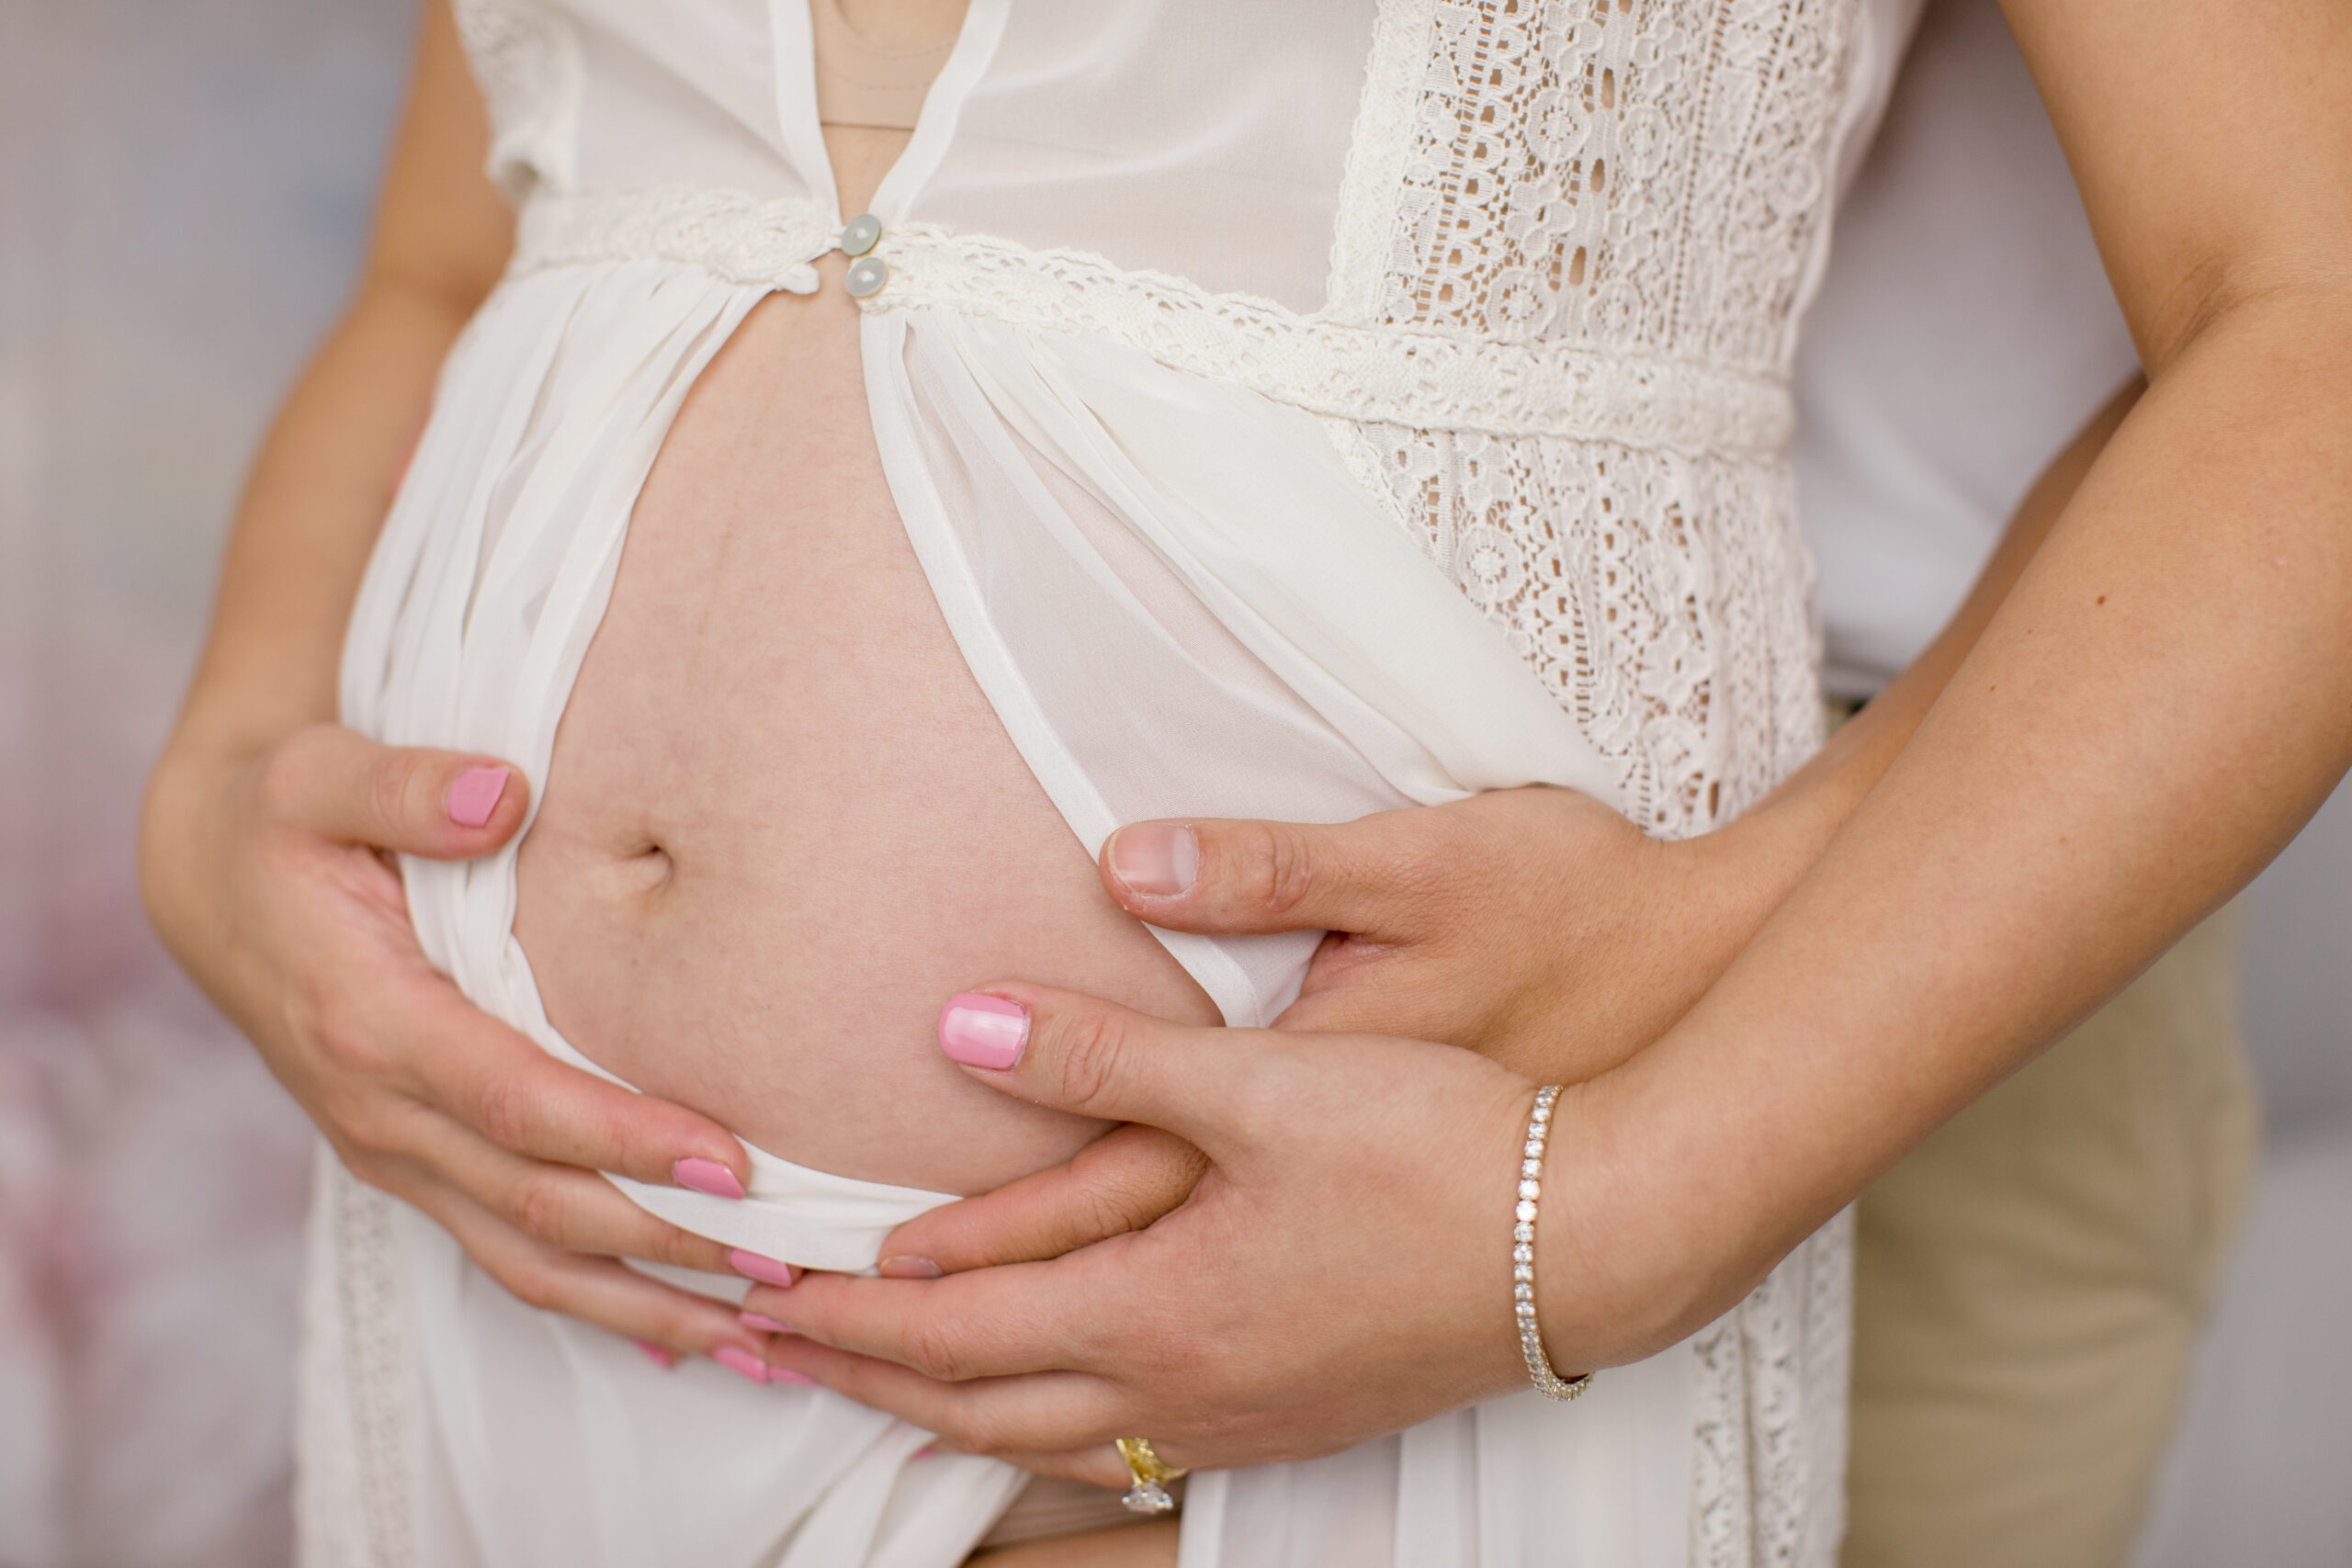 Close up of pregnant belly with soft light colors and lace texture